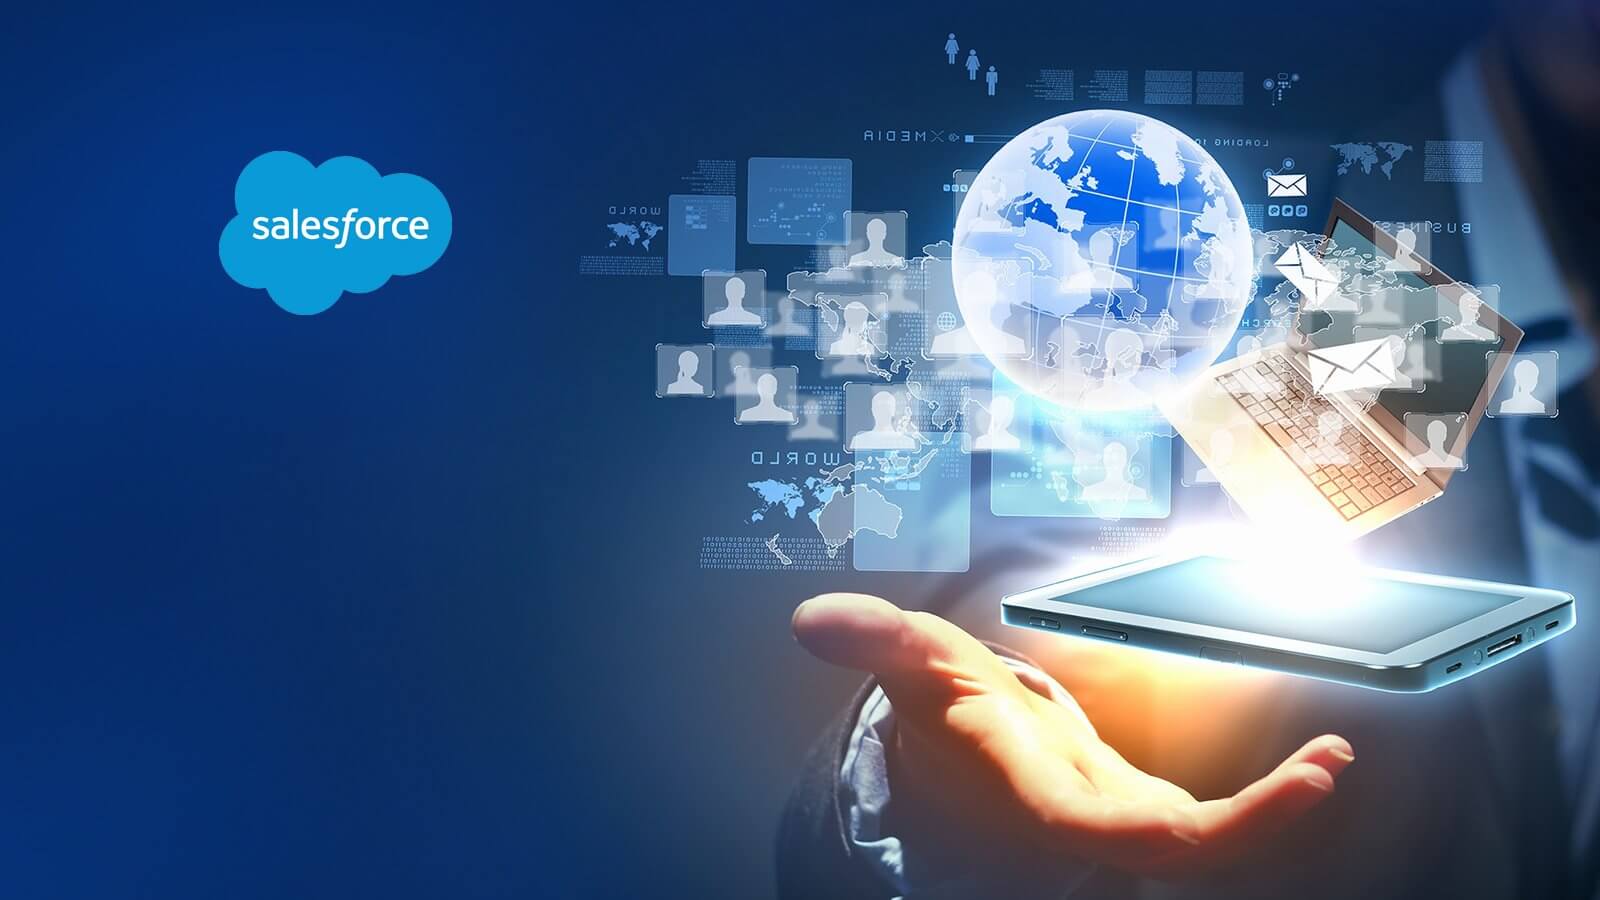 Is Salesforce technology used for app development?